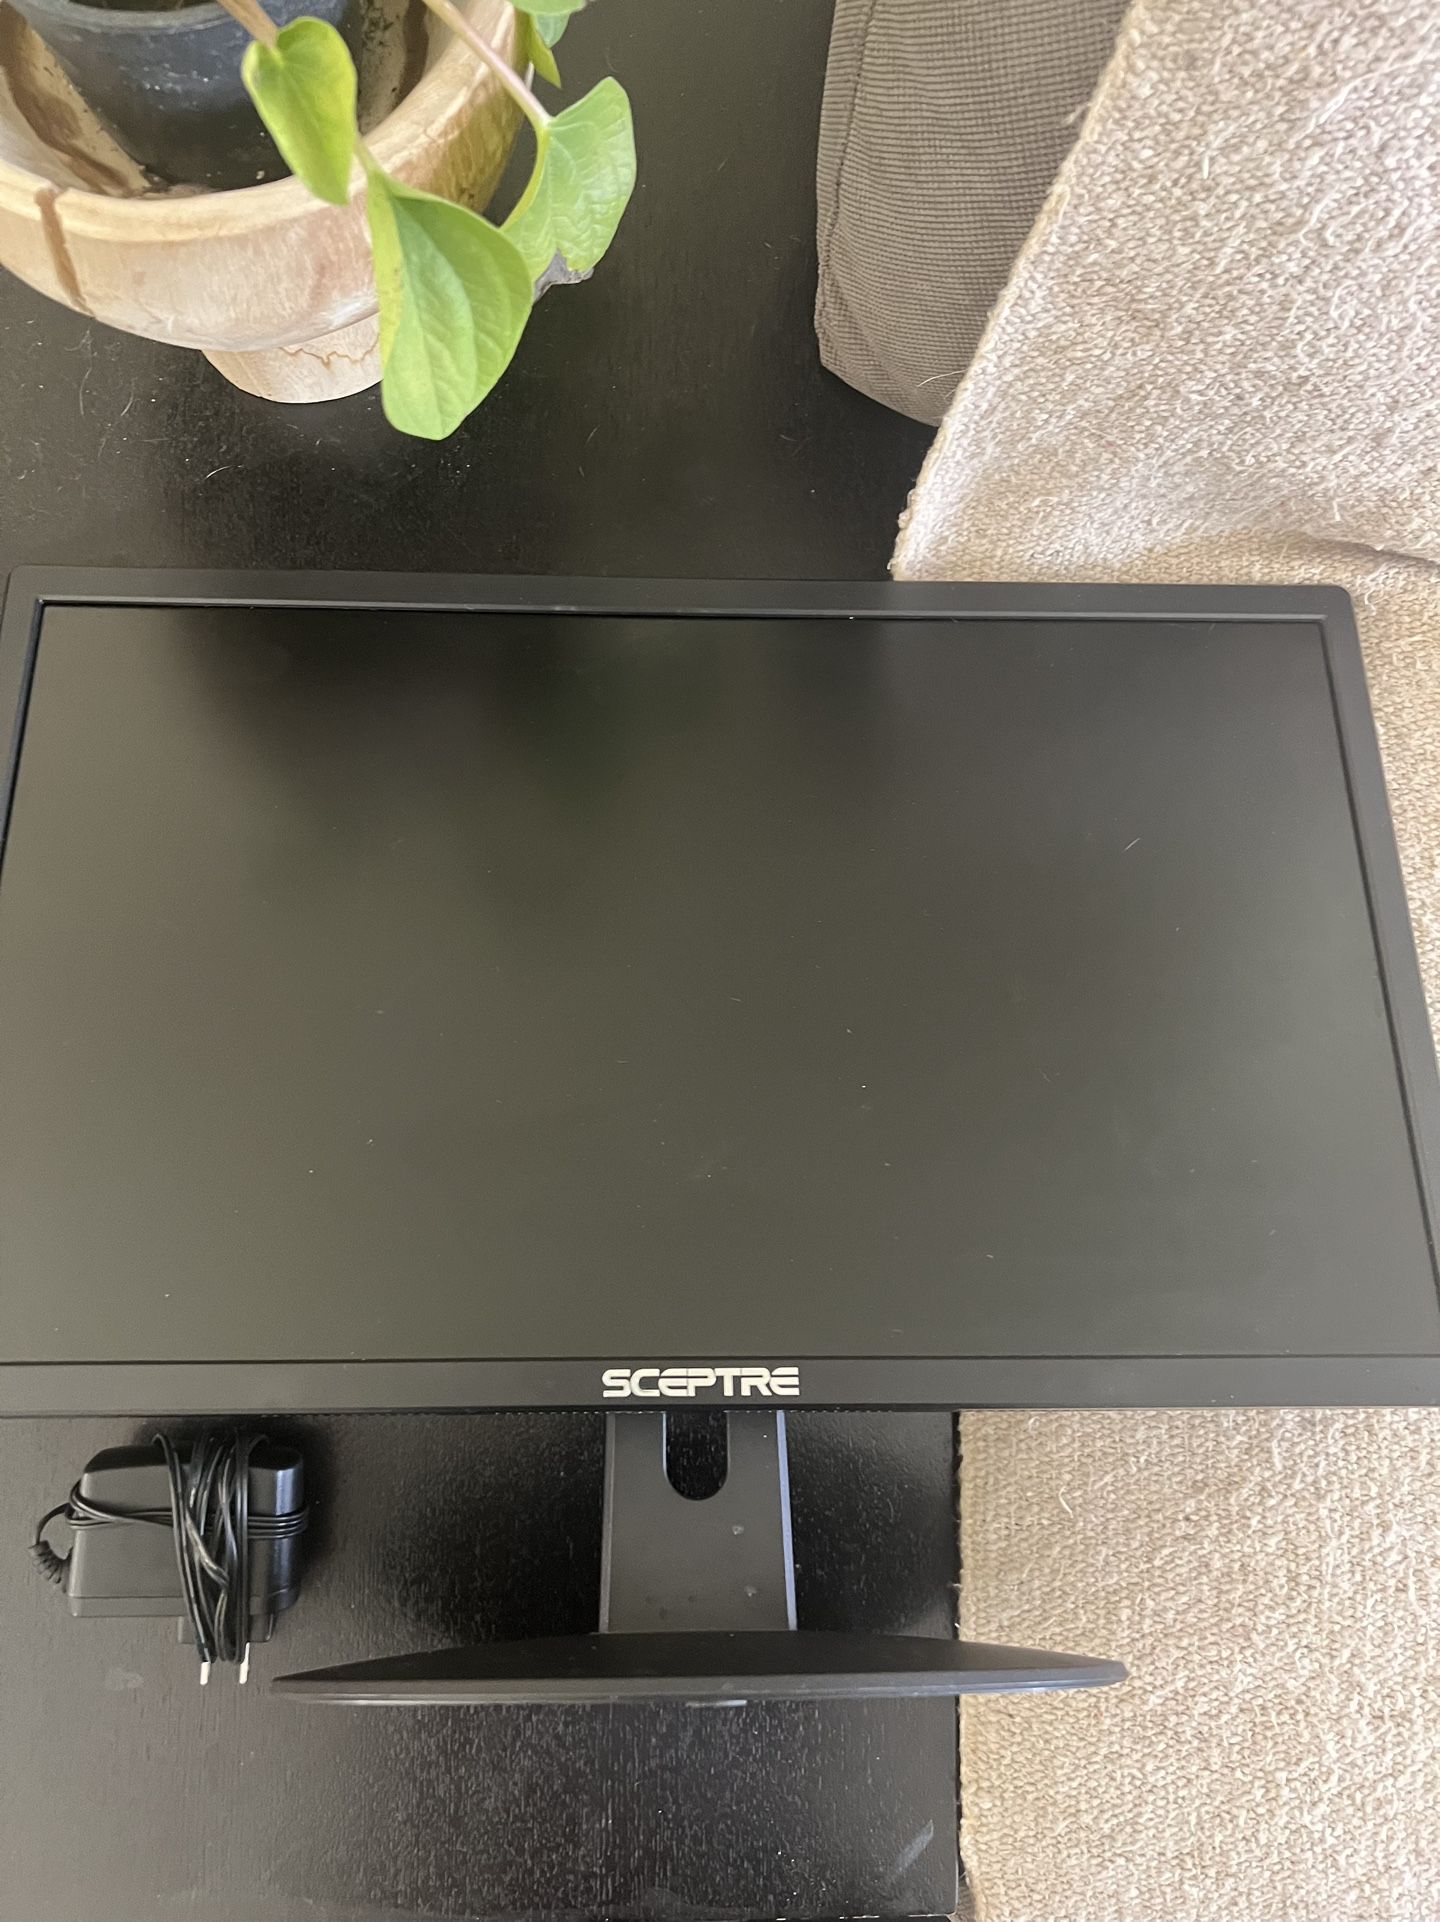 Sceptre 22in LED Computer Monitor 